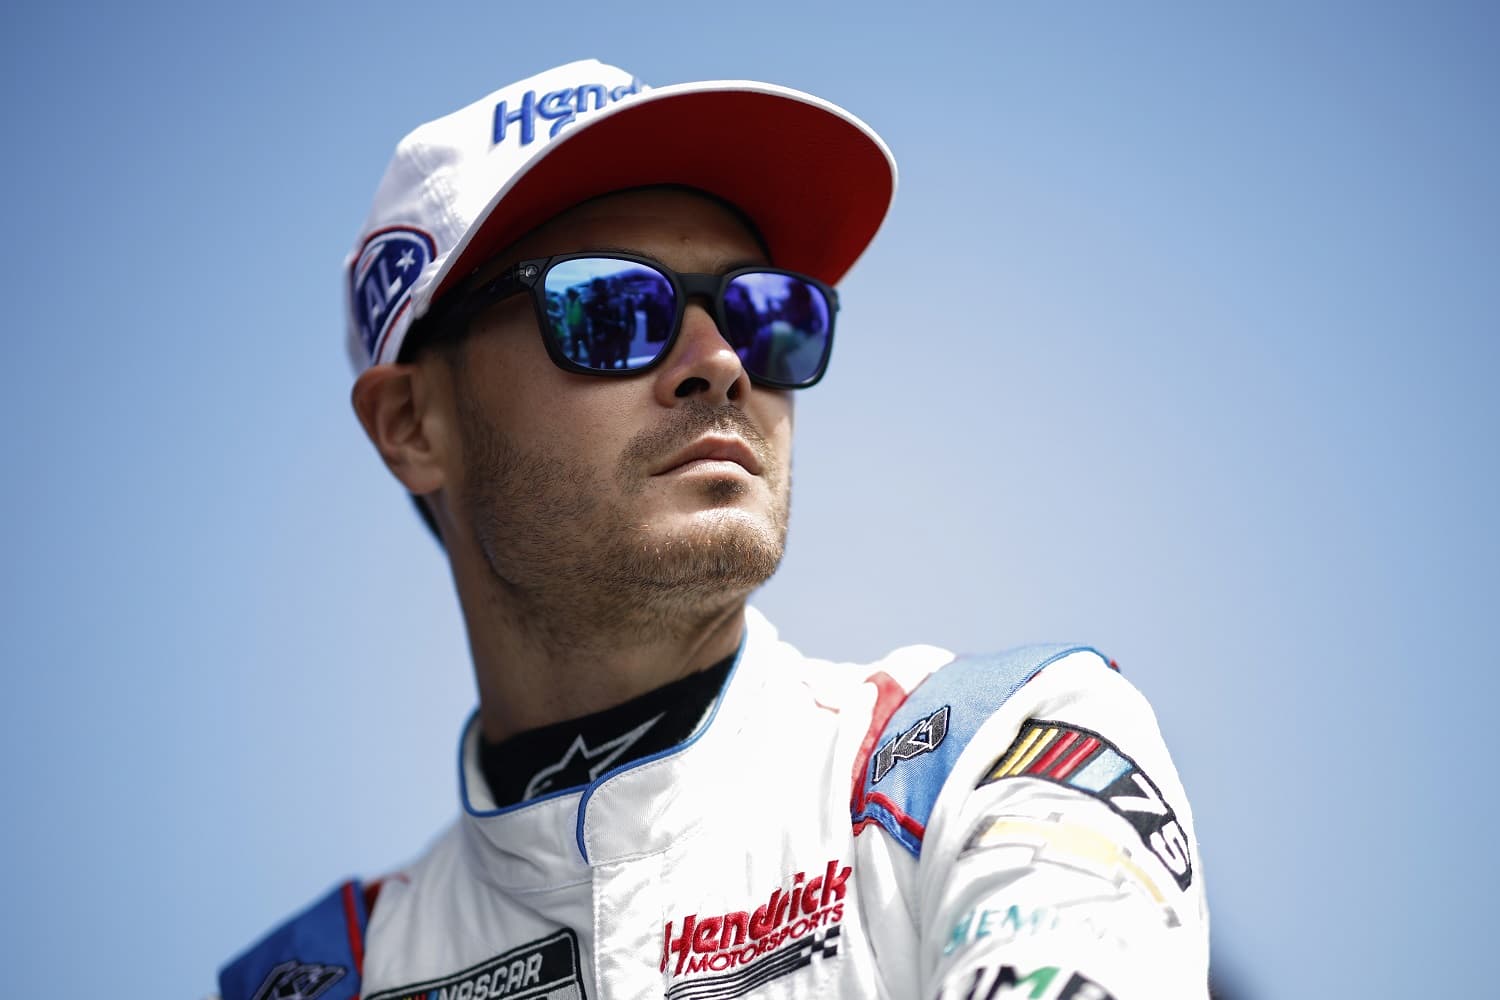 Kyle Larson looks on during qualifying for the NASCAR Cup Series GEICO 500 at Talladega Superspeedway on April 22, 2023. | Sean Gardner/Getty Images